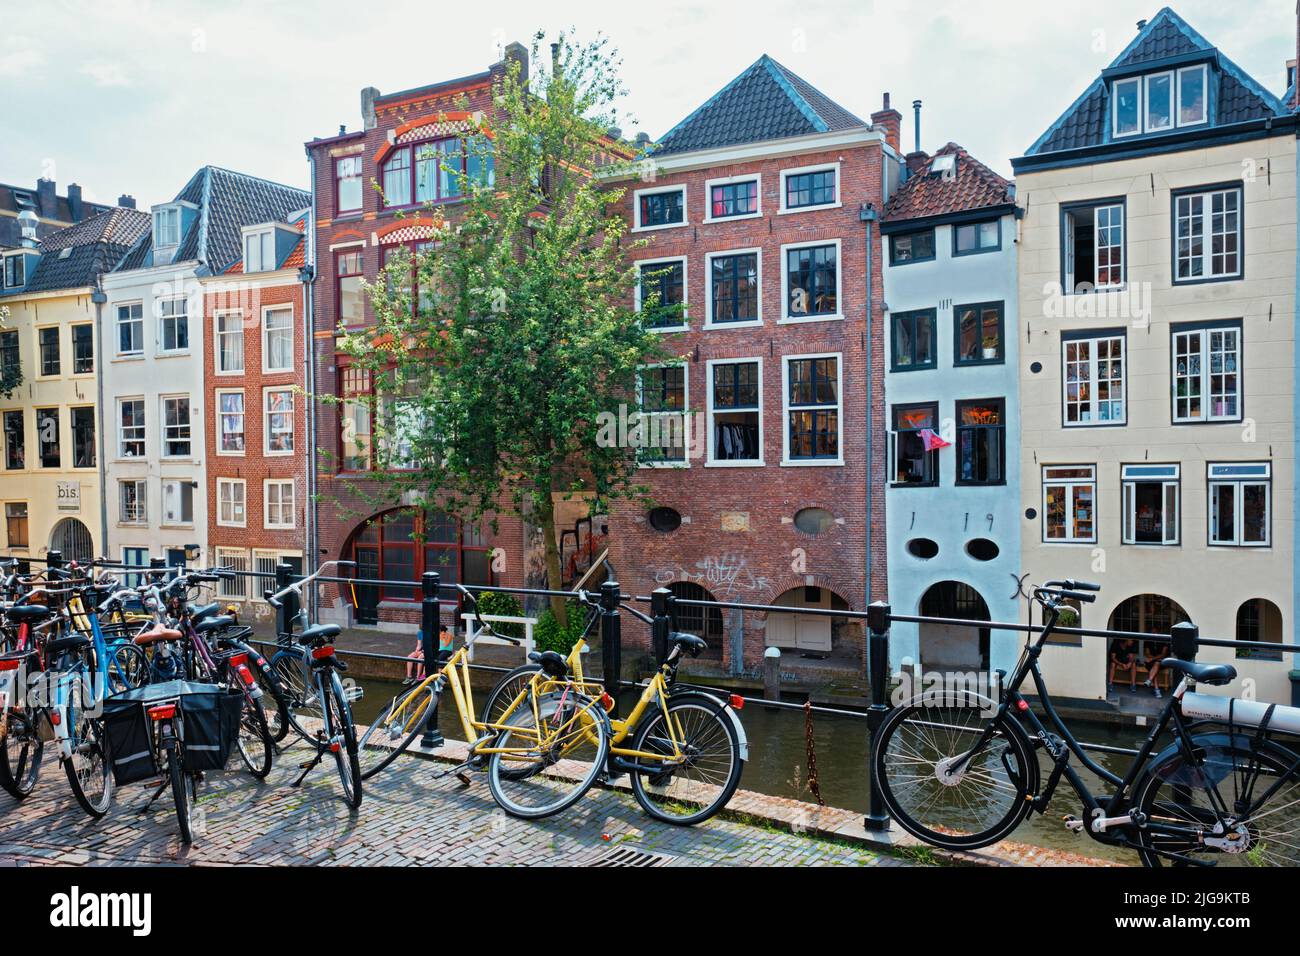 Bicycles which are a very popular transport in Netherlands parked in street near old houses Stock Photo